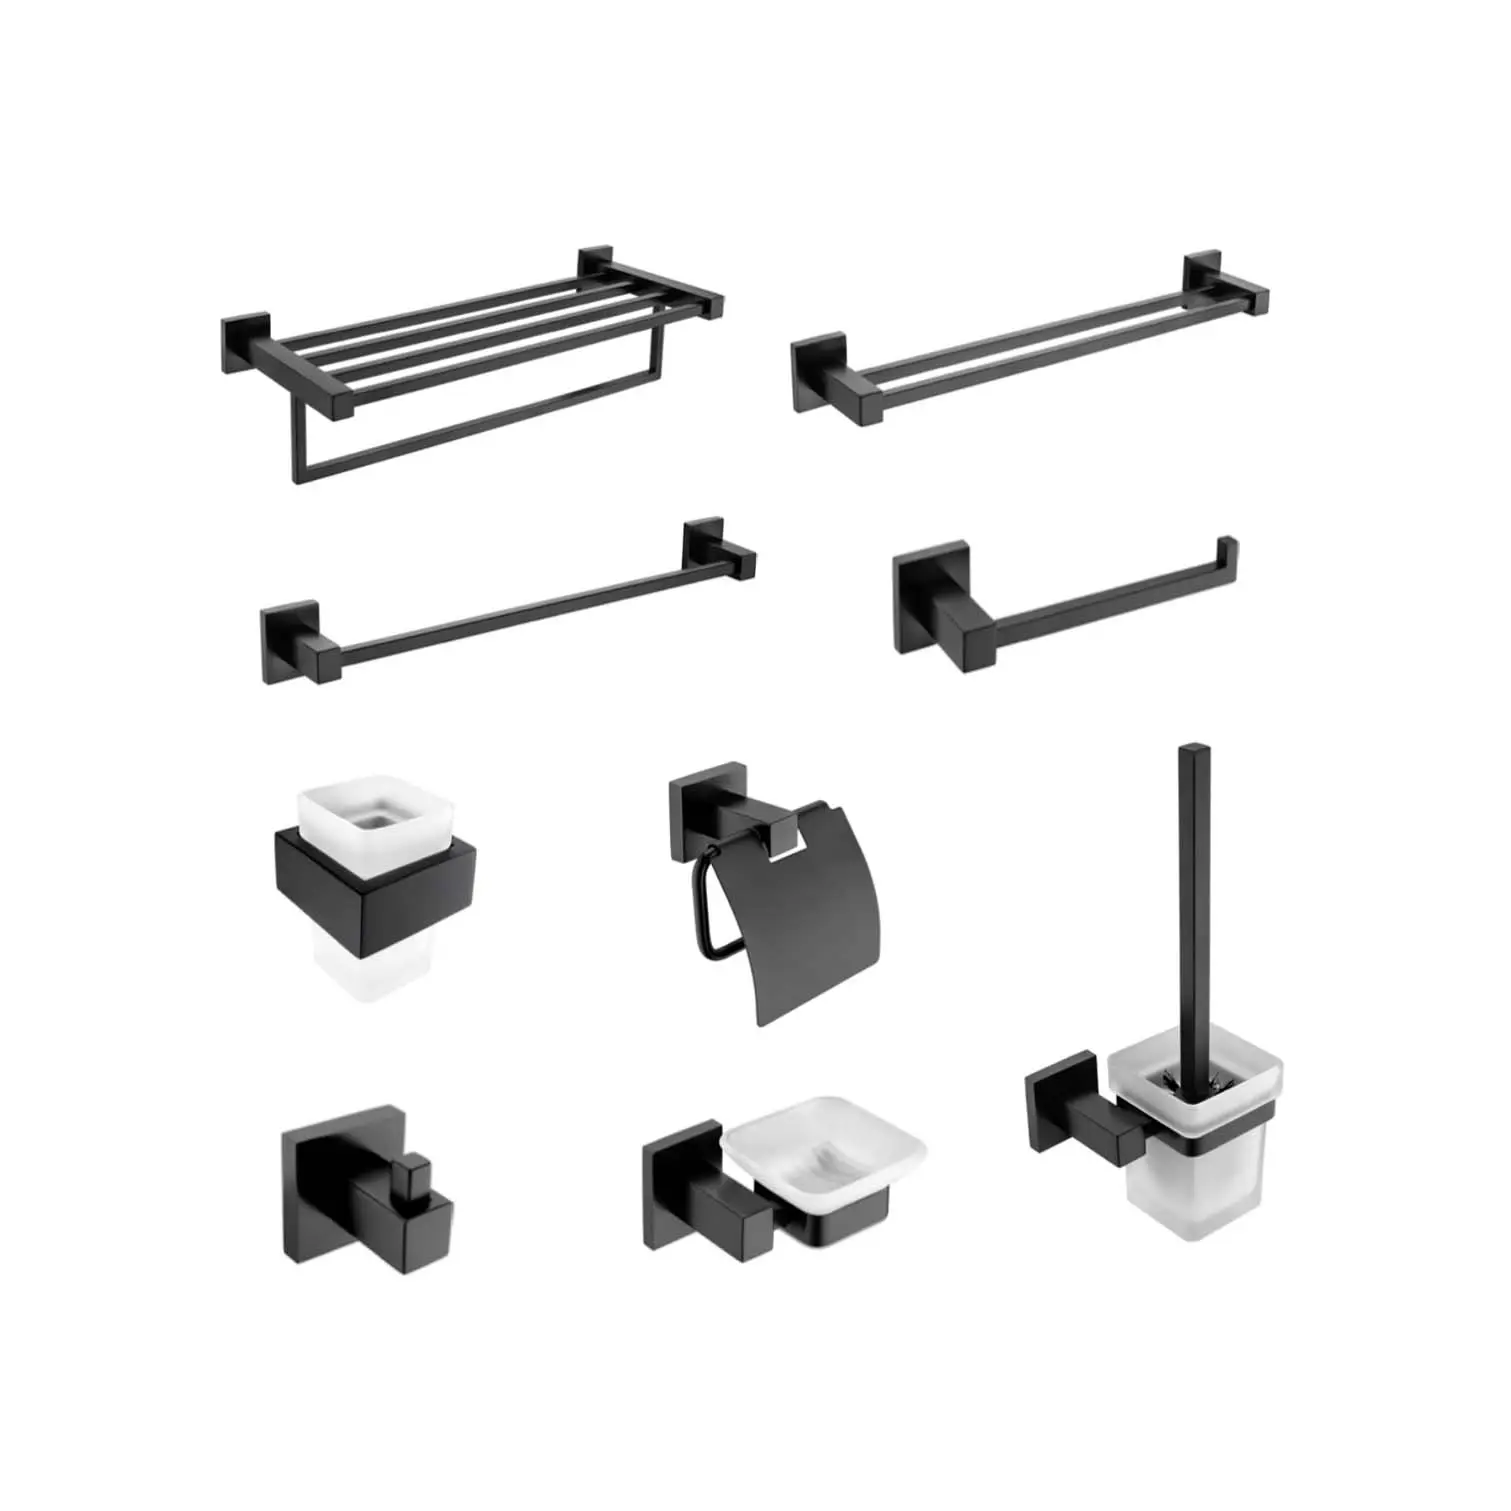 High Quality Black Bathroom Accessories Stainless Steel 9 Pieces Set Bathroom Hardware Set For Hotel